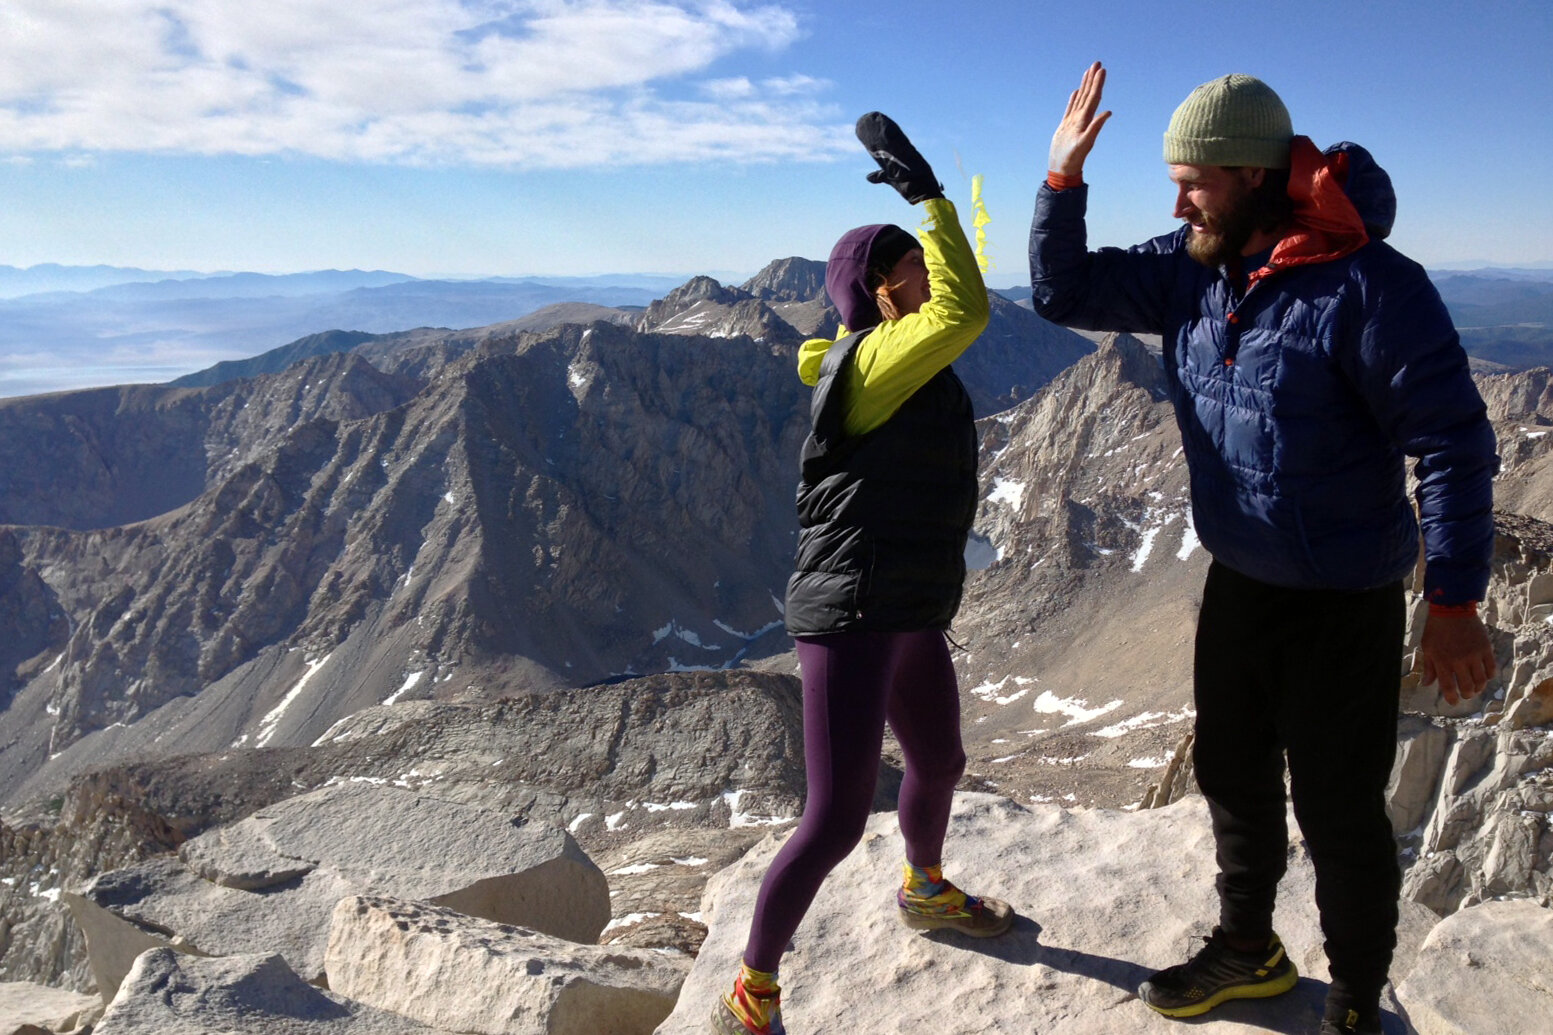 On the summit of Mt. Whitney (14,505 feet above sea level)